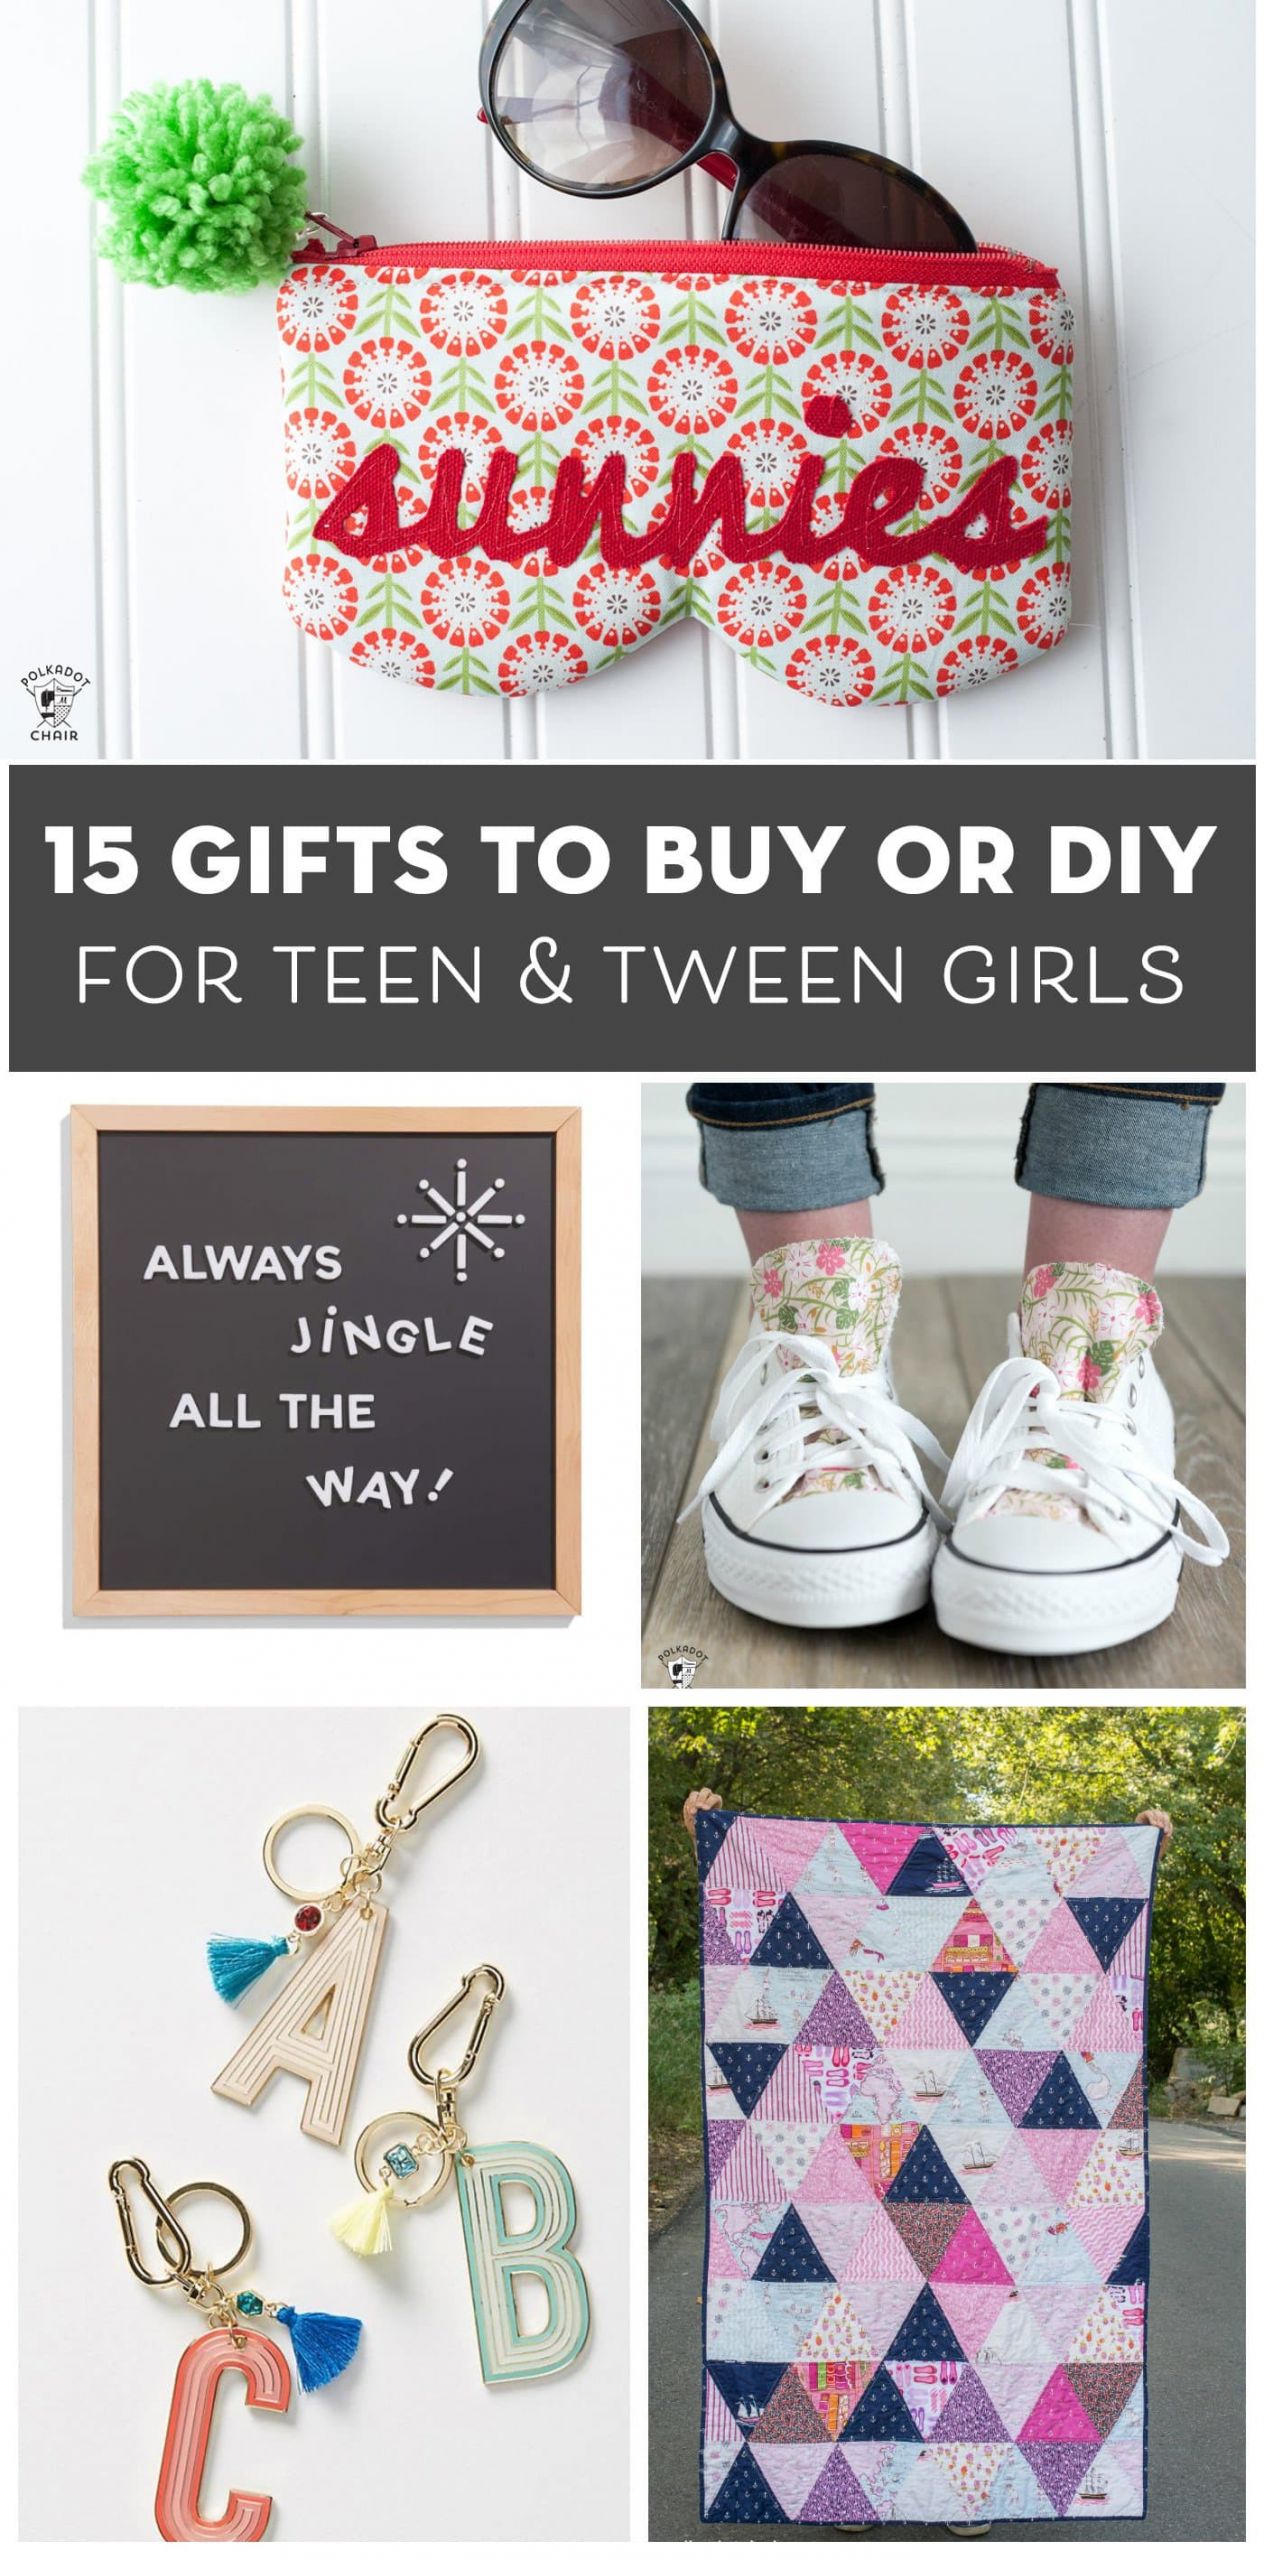 DIY Gifts For Tweens
 15 Gift Ideas for Teenage Girls That You Can DIY or Buy